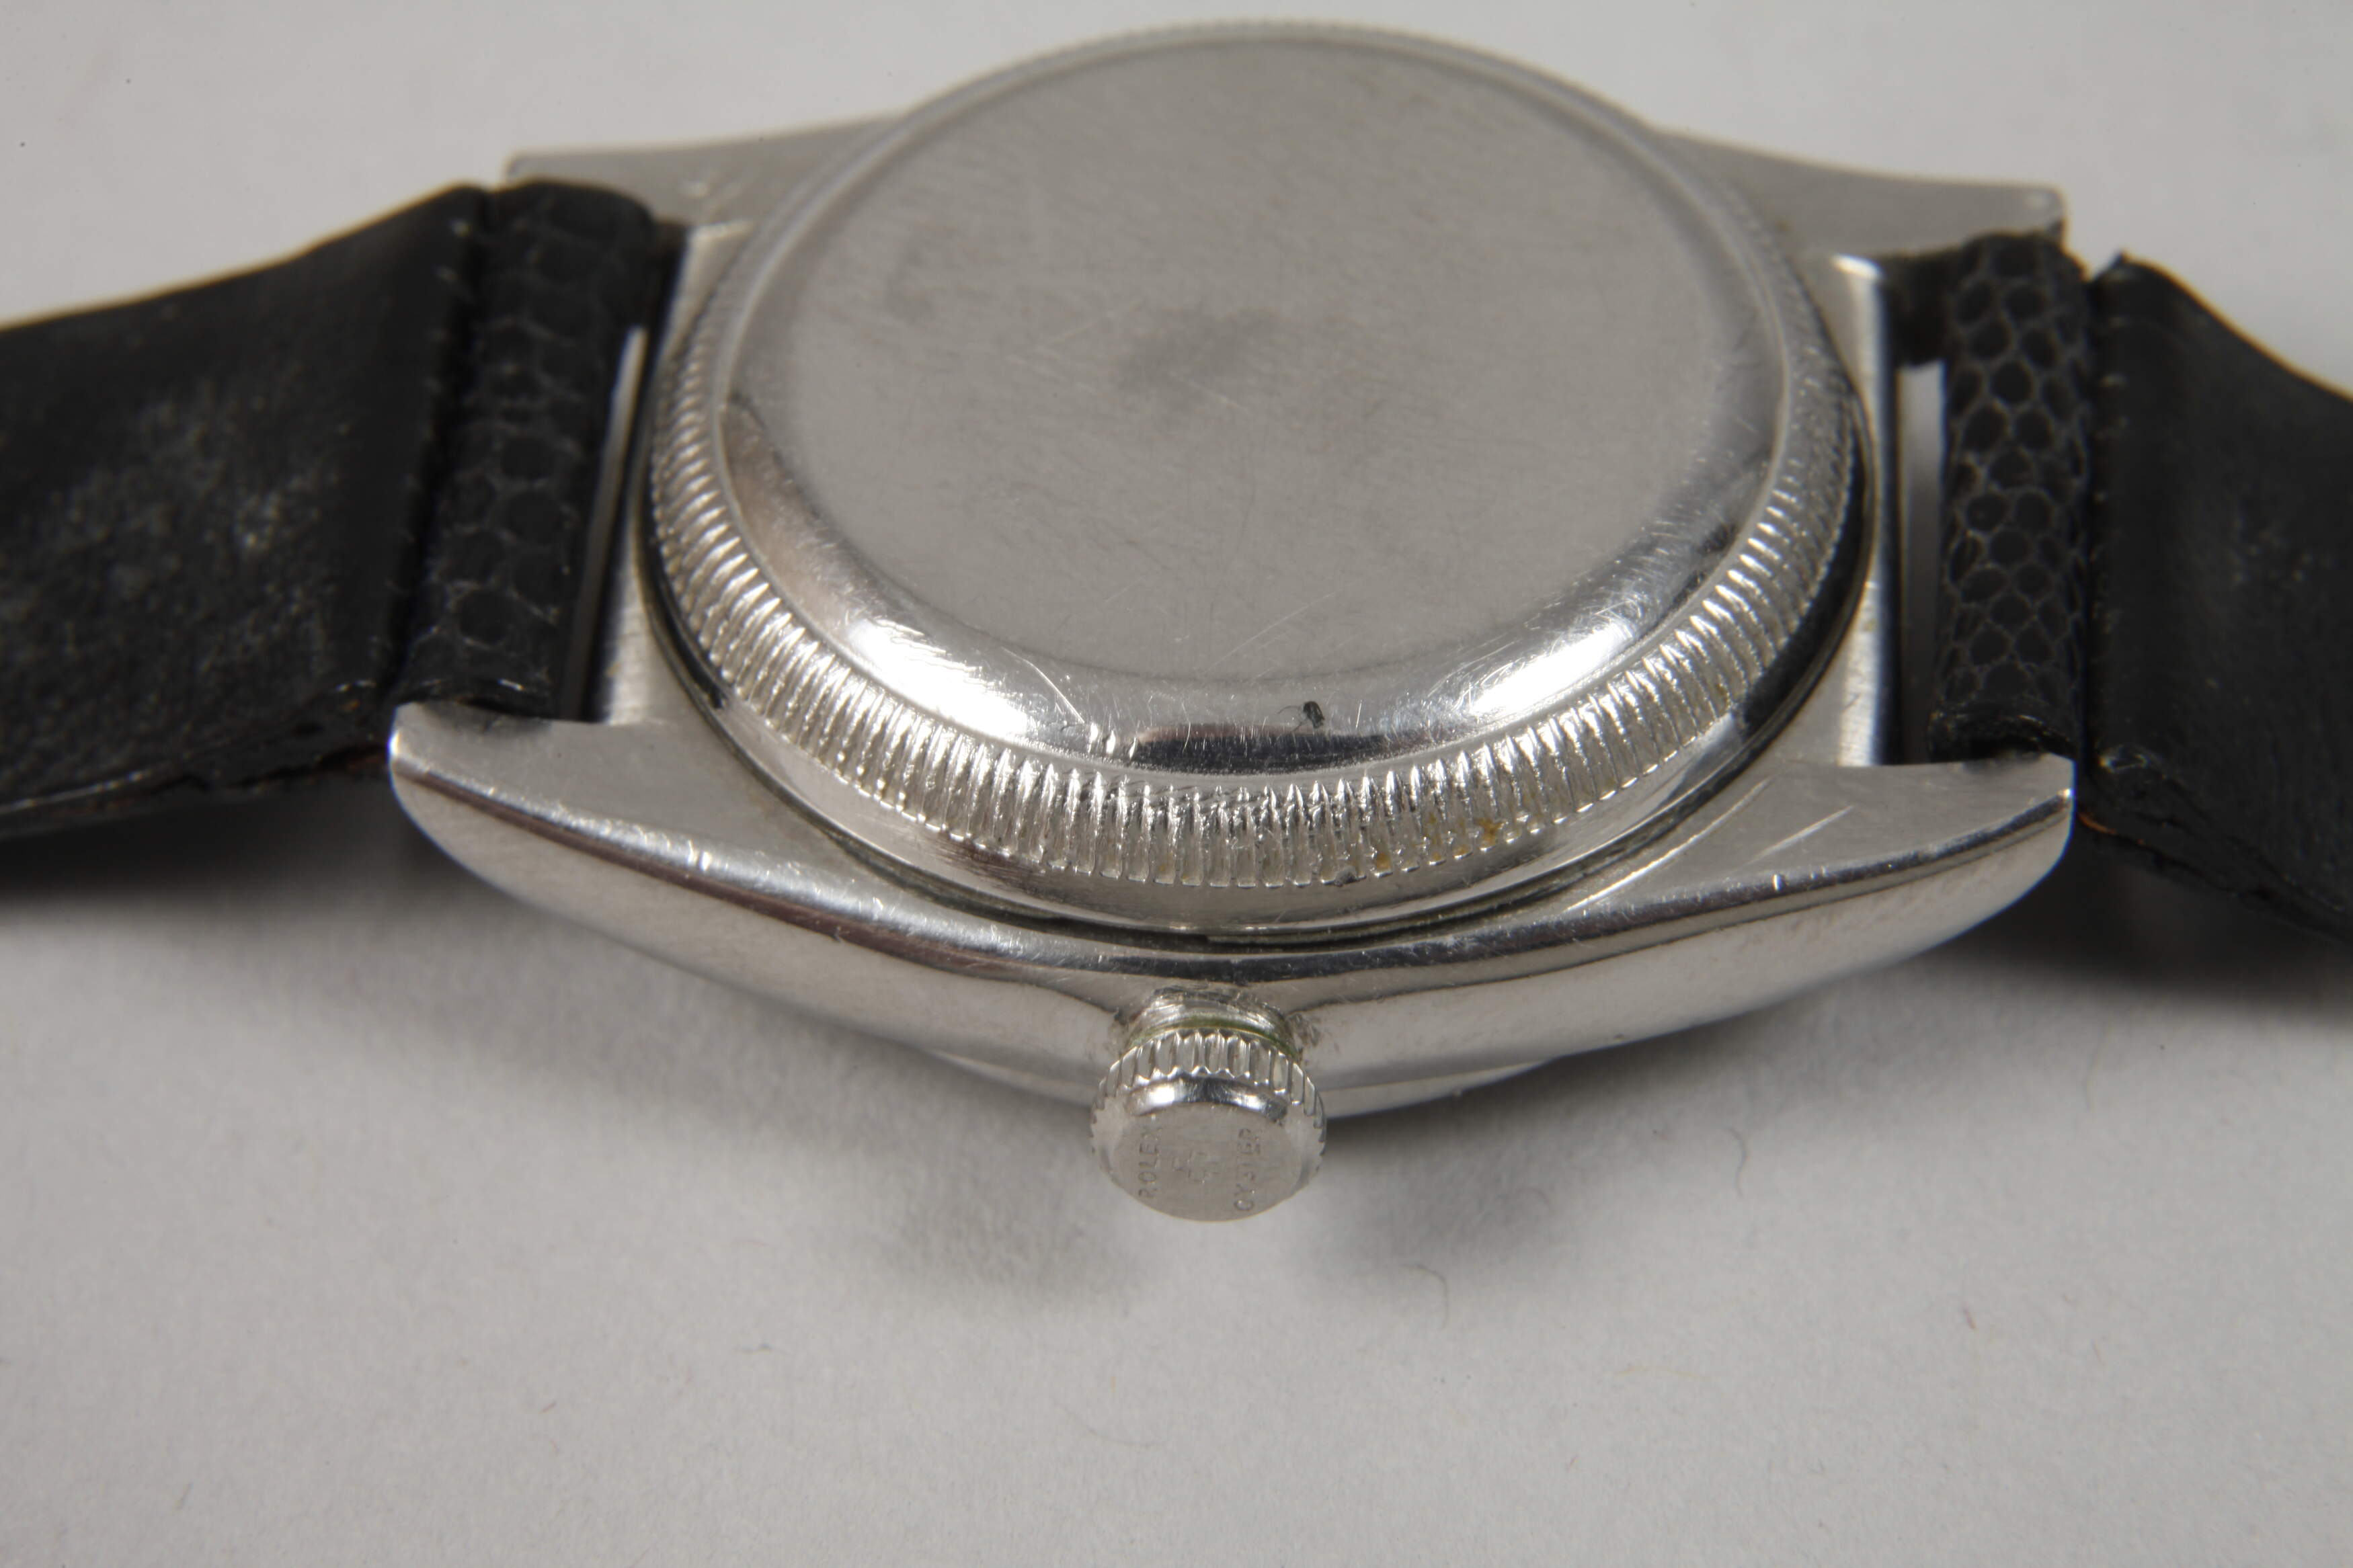 Early Rolex Oyster Perpetual Bubble Back - Image 3 of 7